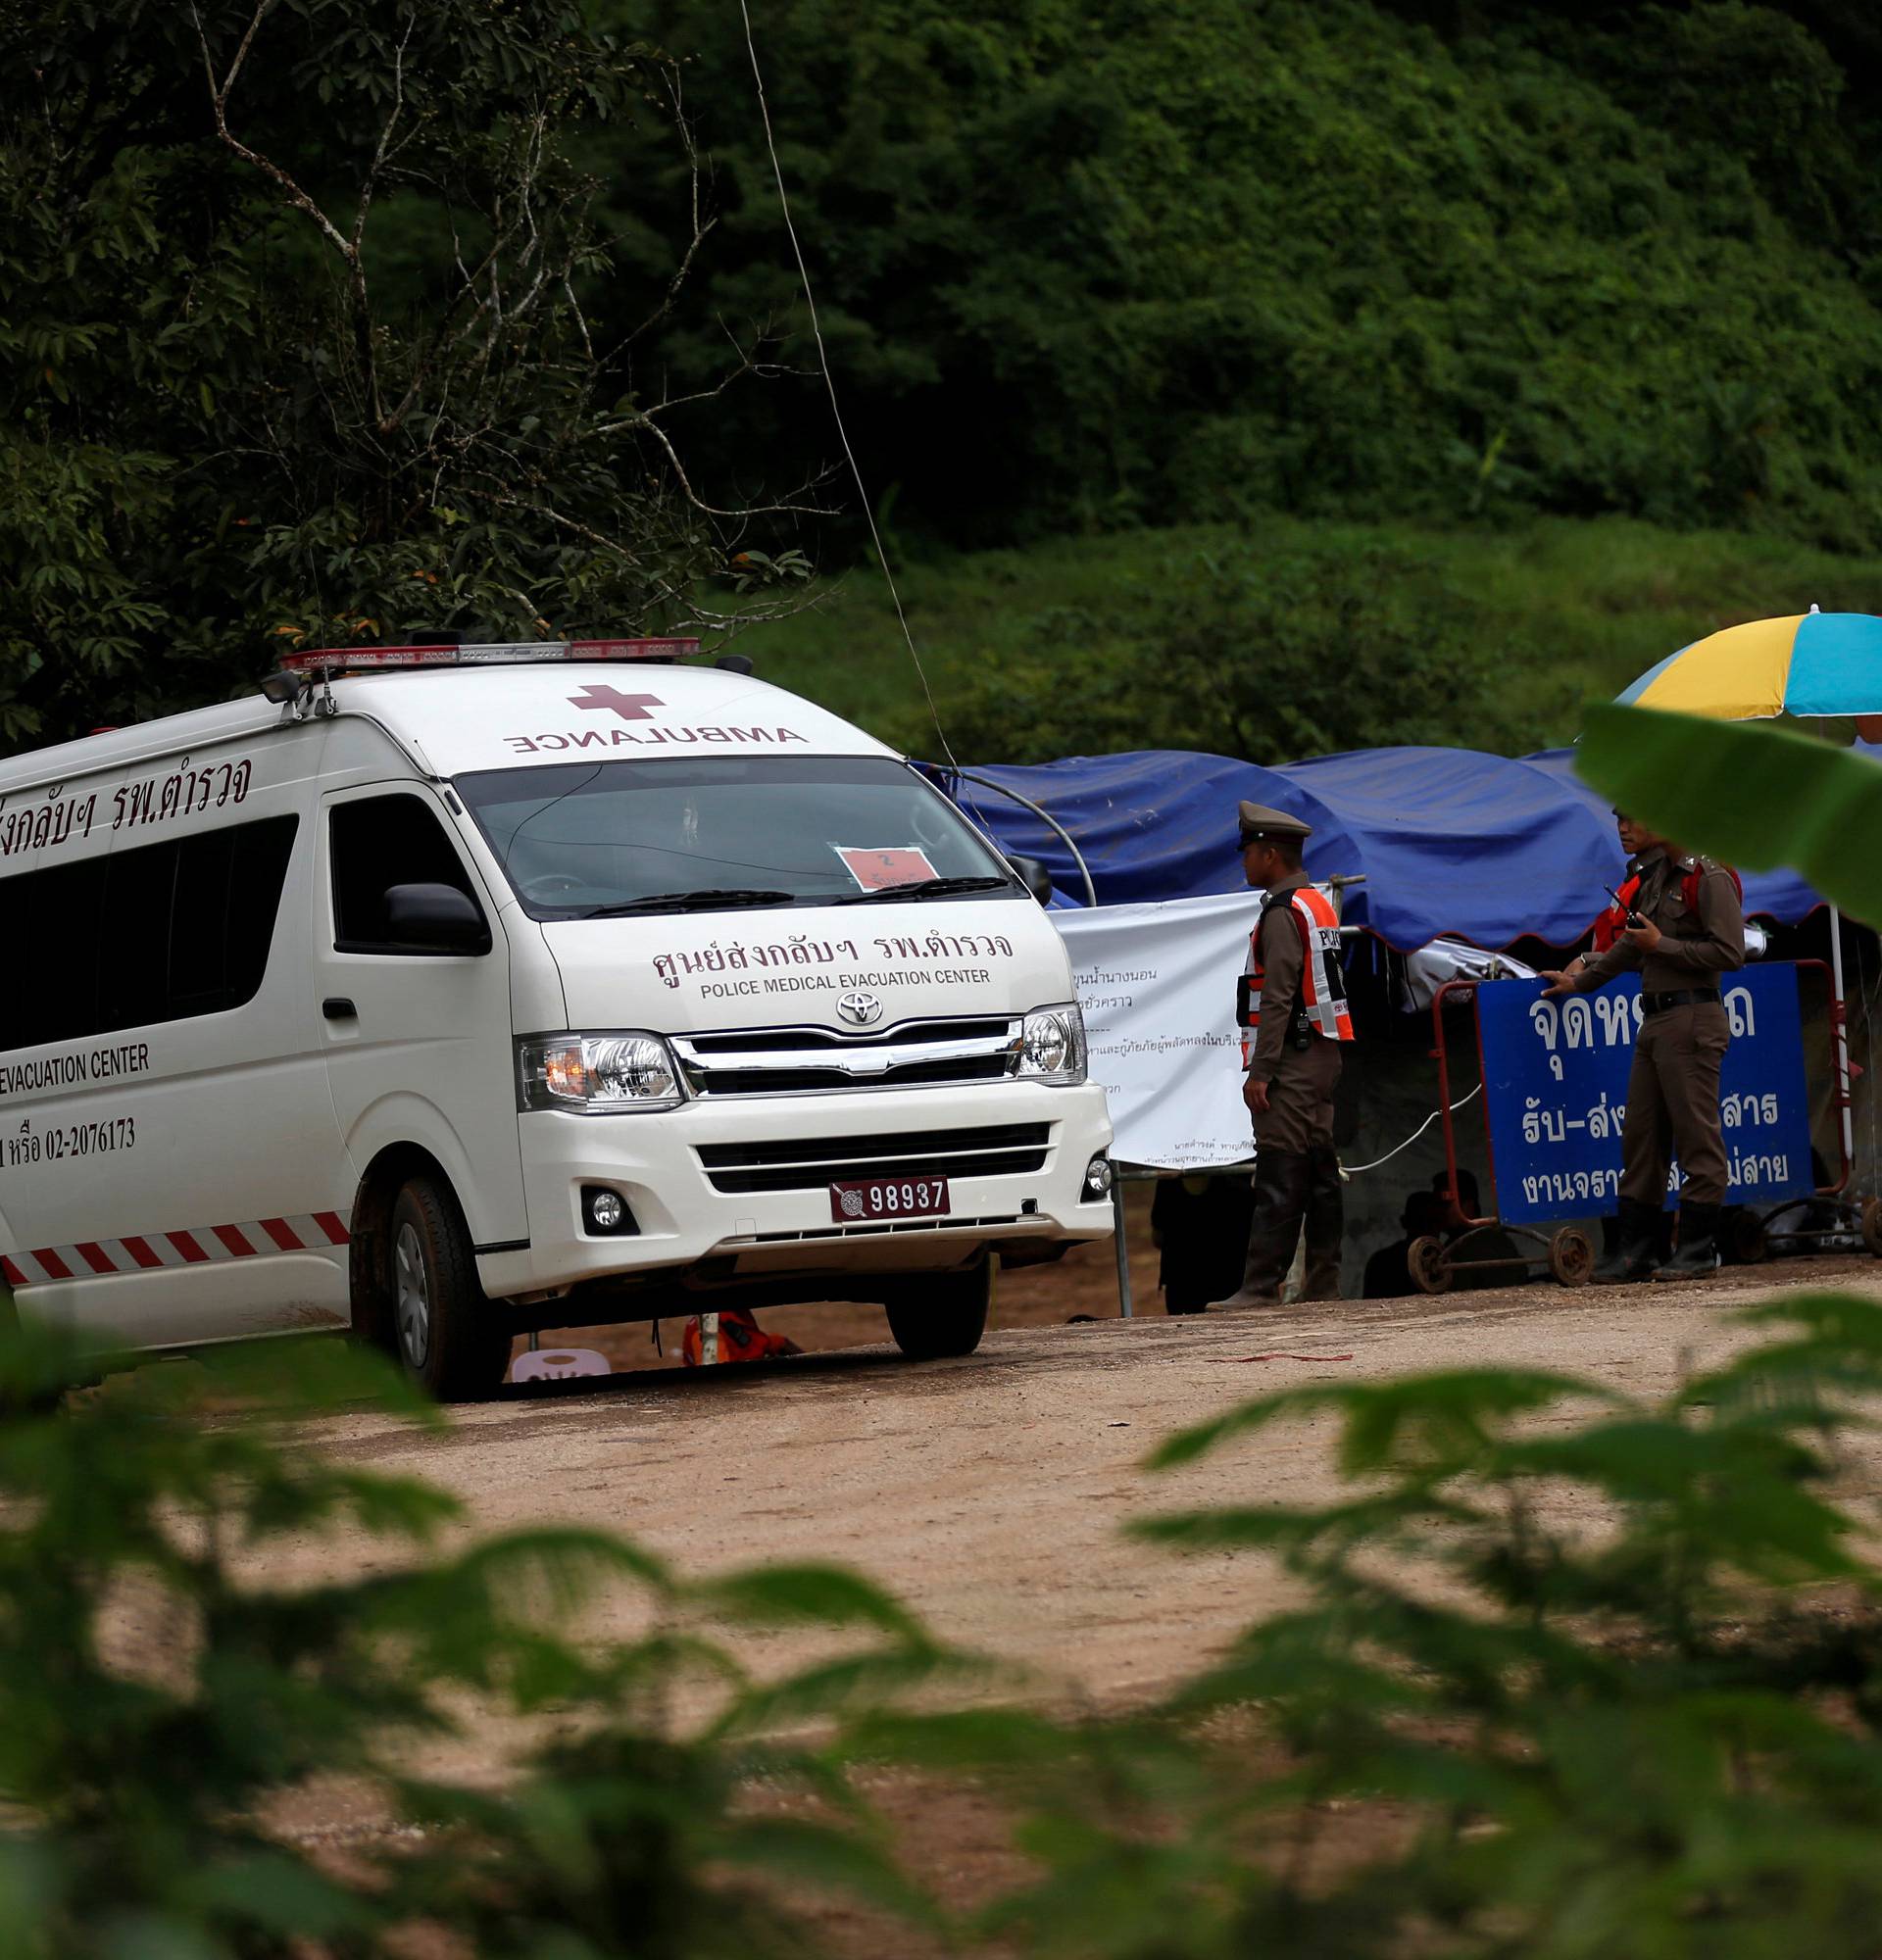 An ambulance seen  near the Tham Luang cave complex in the northern province of Chiang Rai